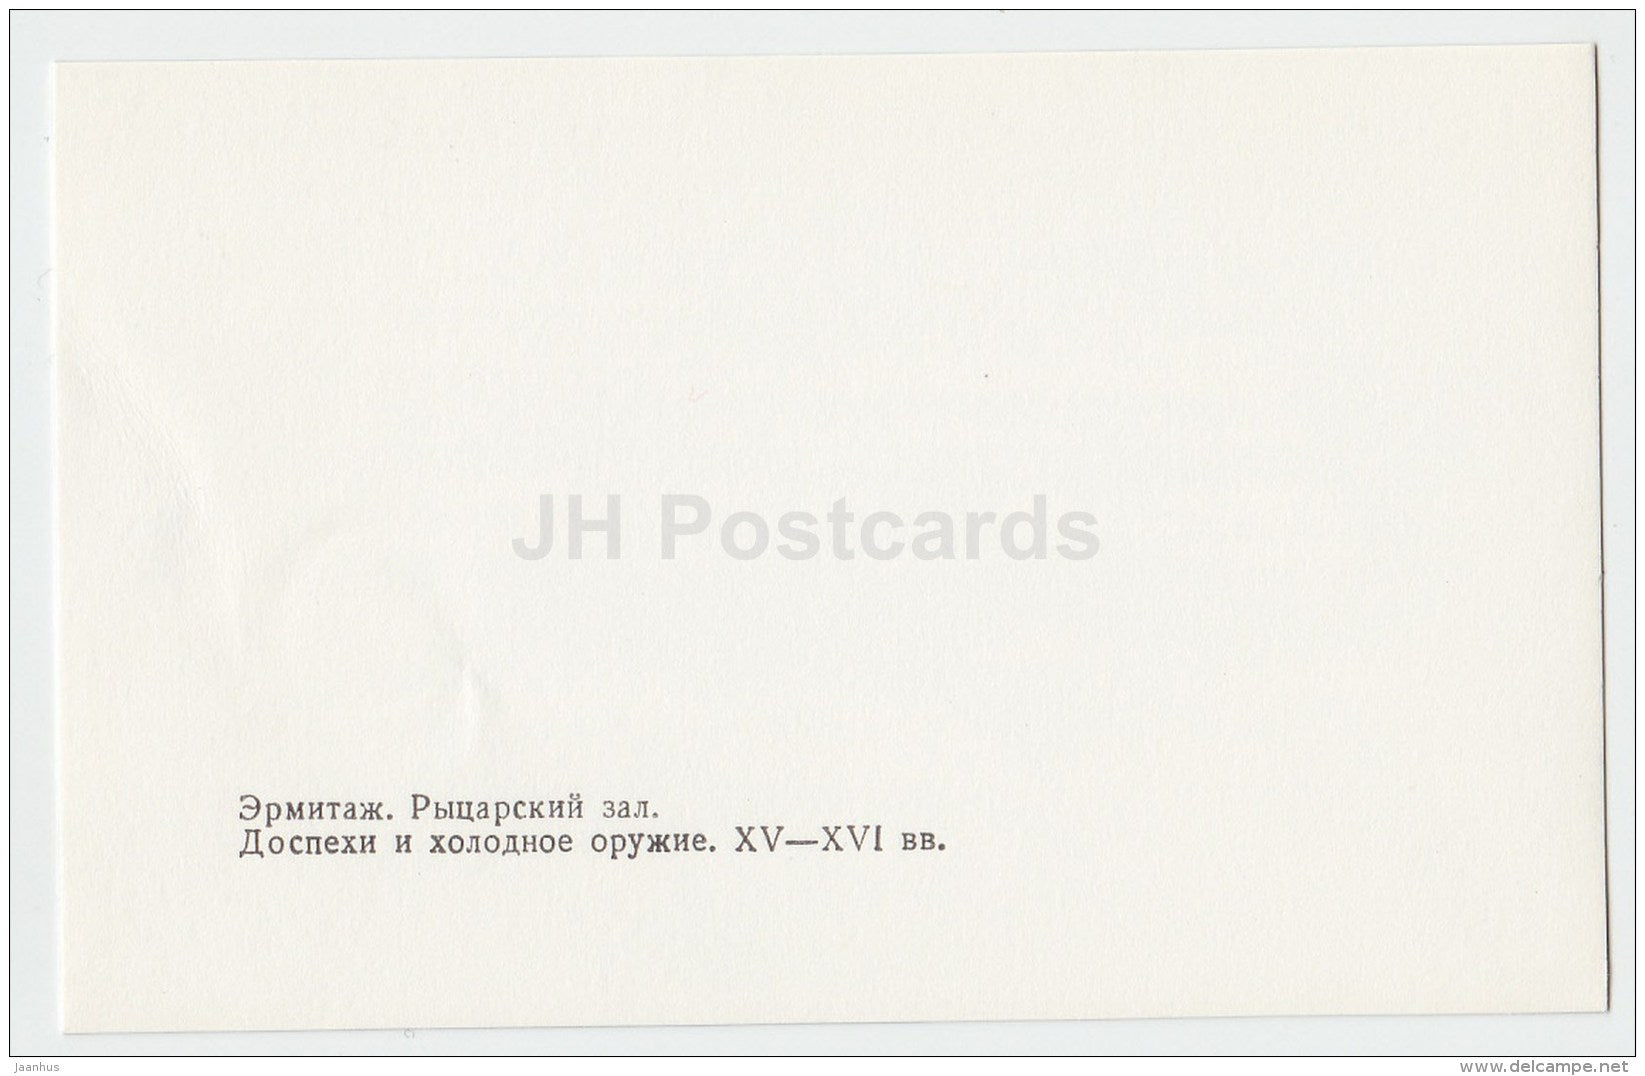 Knights armor and edged weapons - Hermitage - Knights' Hall - St. Petersburg - 1986 - Russia USSR - unused - JH Postcards